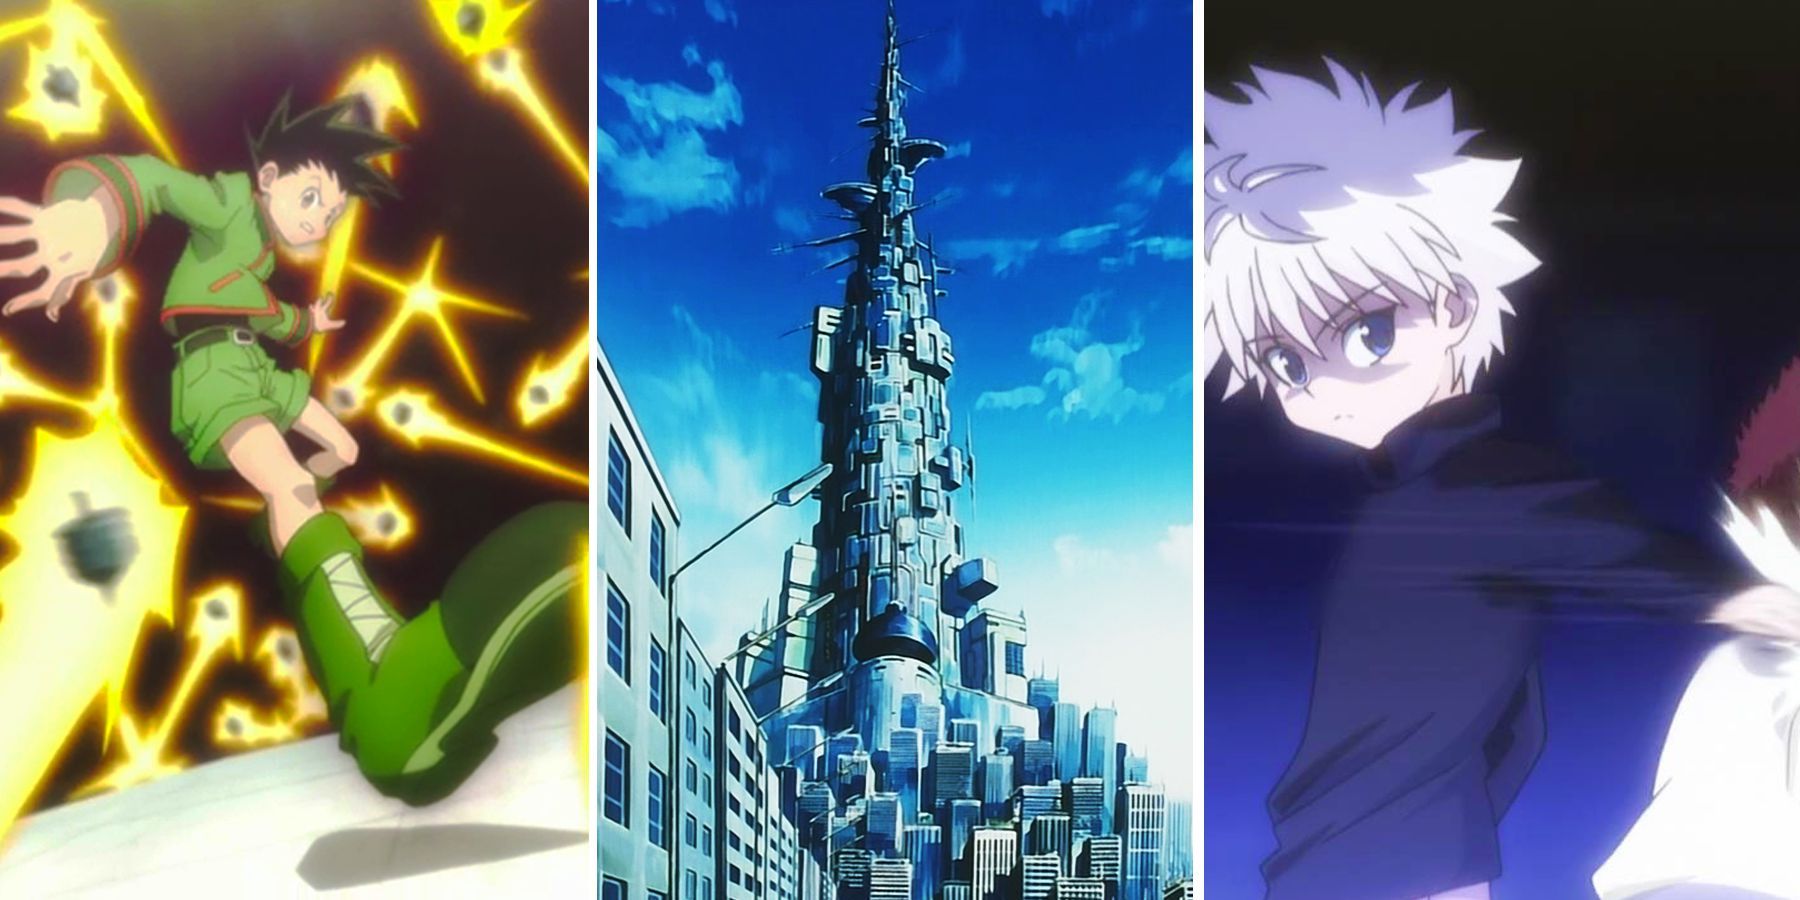 Everything Begins With Your Heart: Hunter x Hunter Anime (1999 + 2011  versions) and Manga Differences + Opinion - Heavens Arena Arc